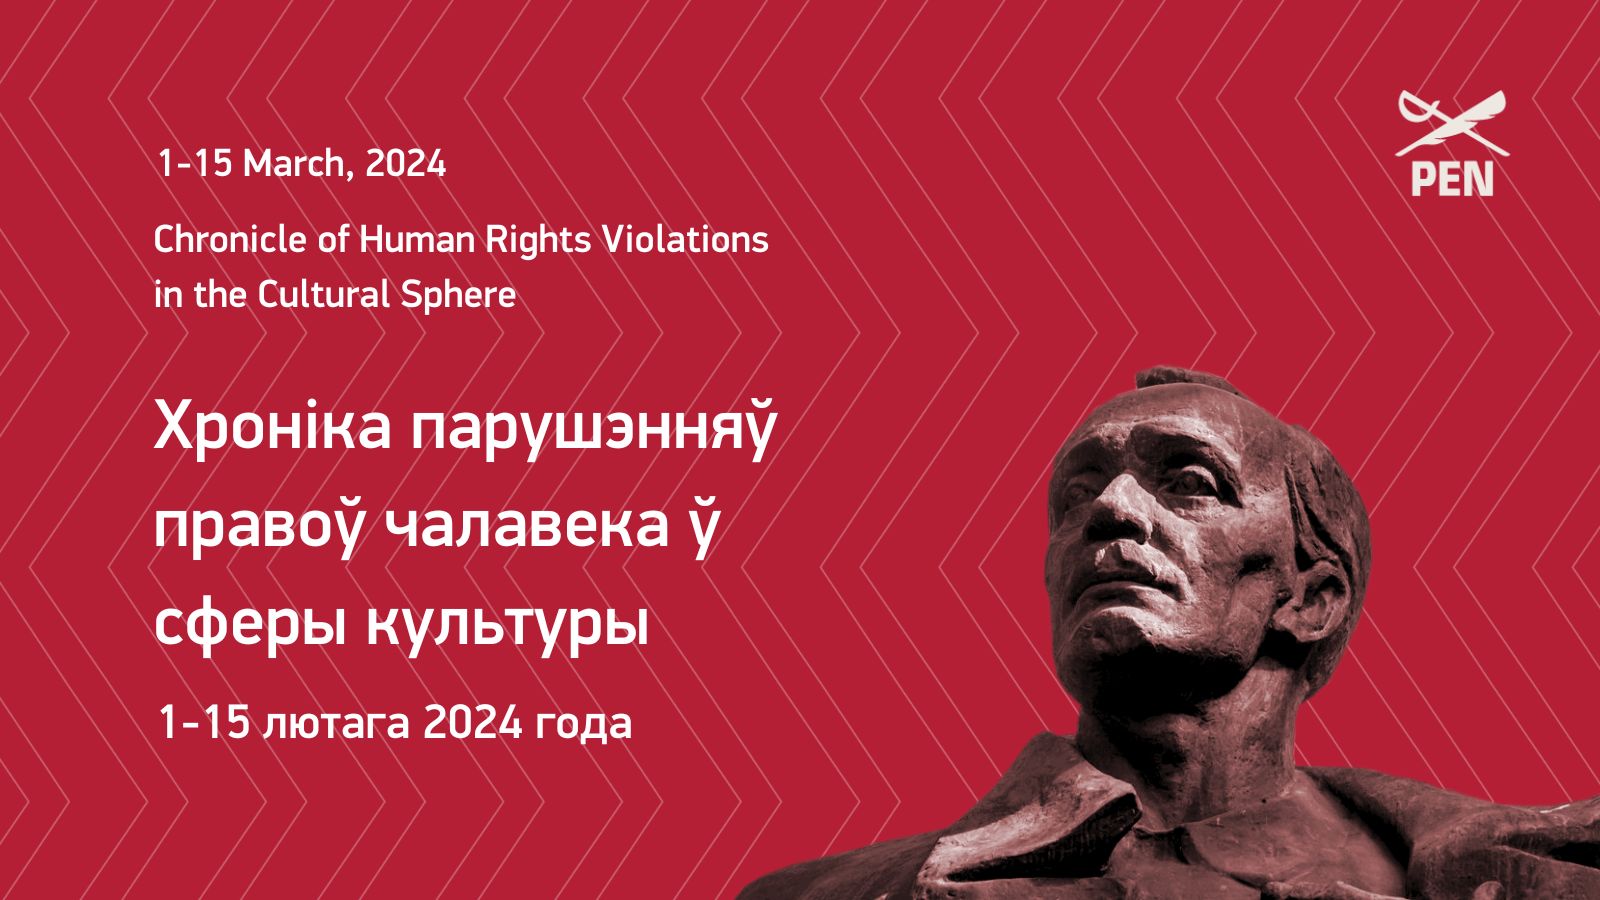 Chronicle of human rights violations in the sphere of culture (1-15 March 2024)